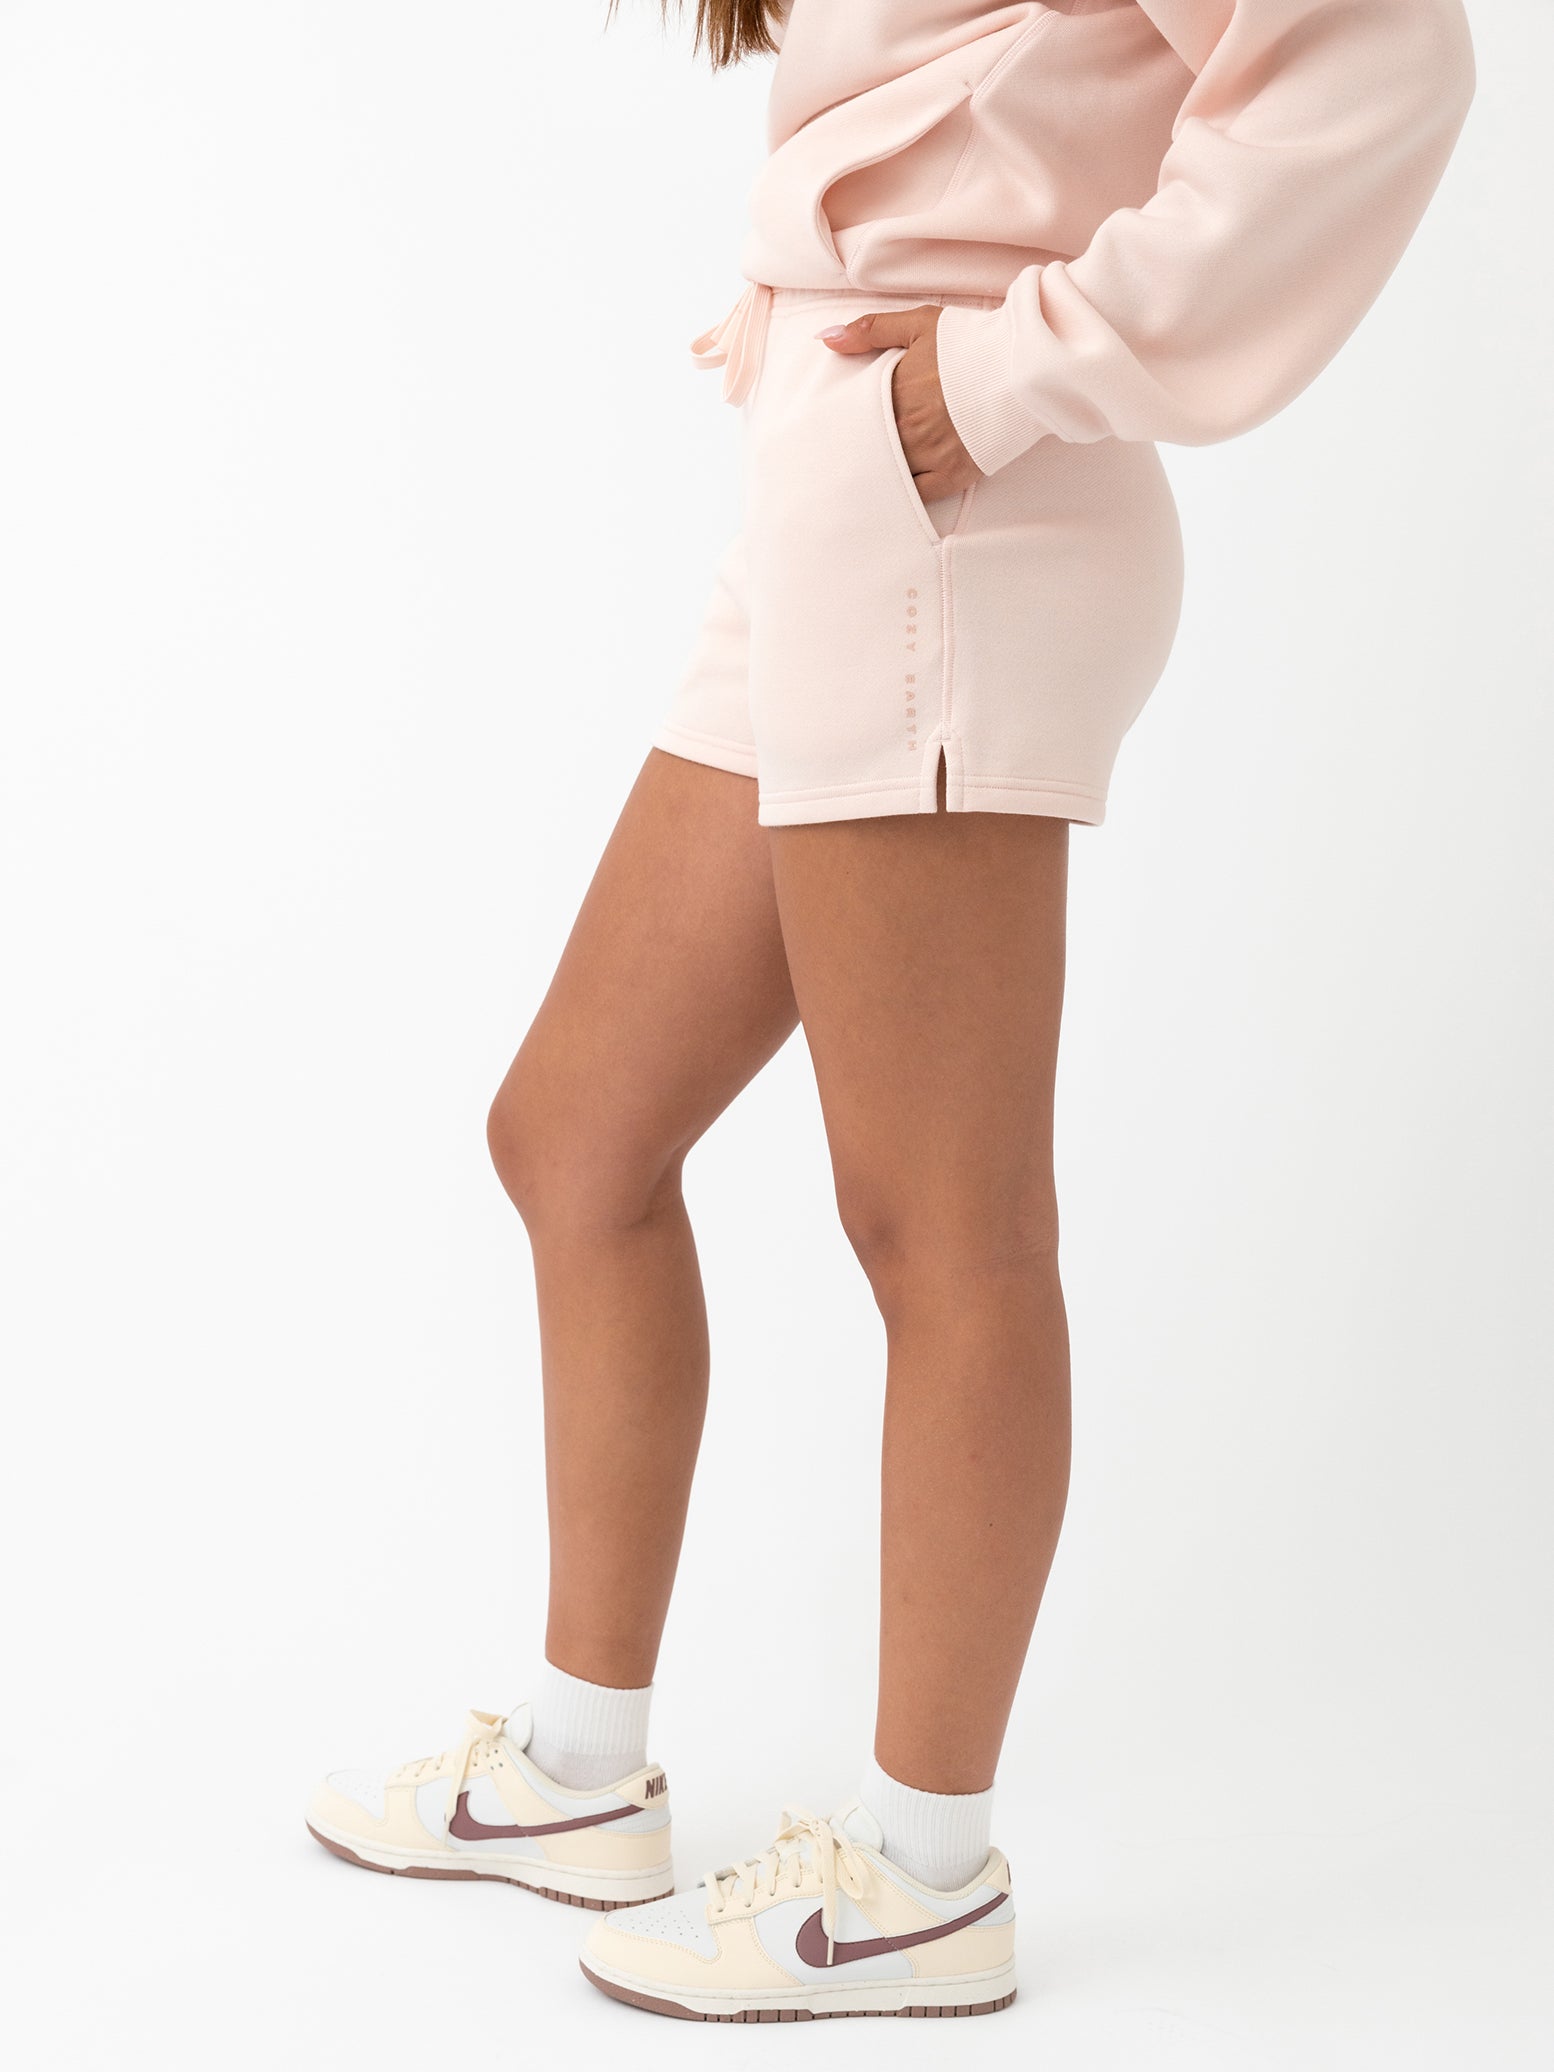 Peony CityScape Shorts. The shorts are being worn by a female model in casual shoes. The background it a white background. 